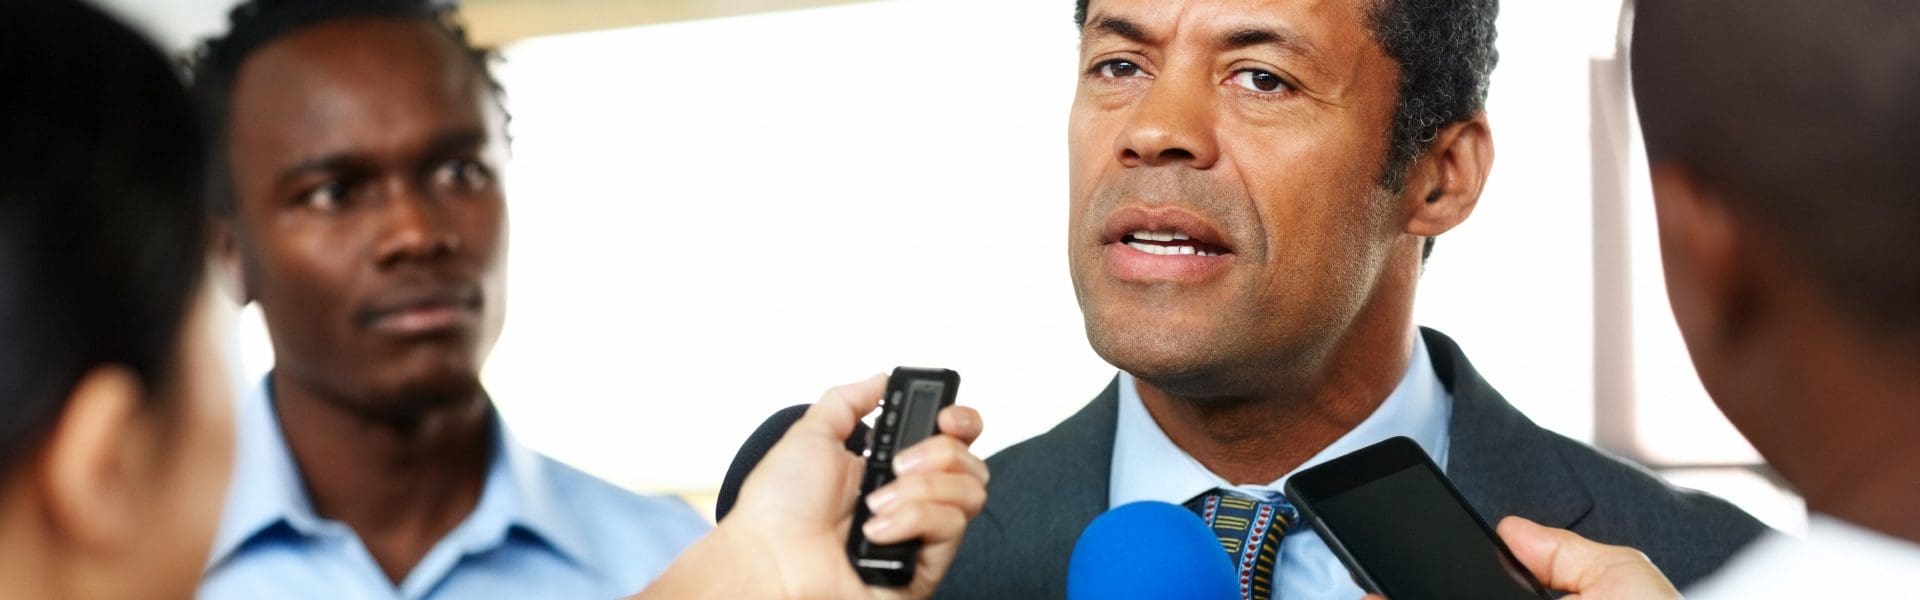 Mature African man answering to journalists during a press conference